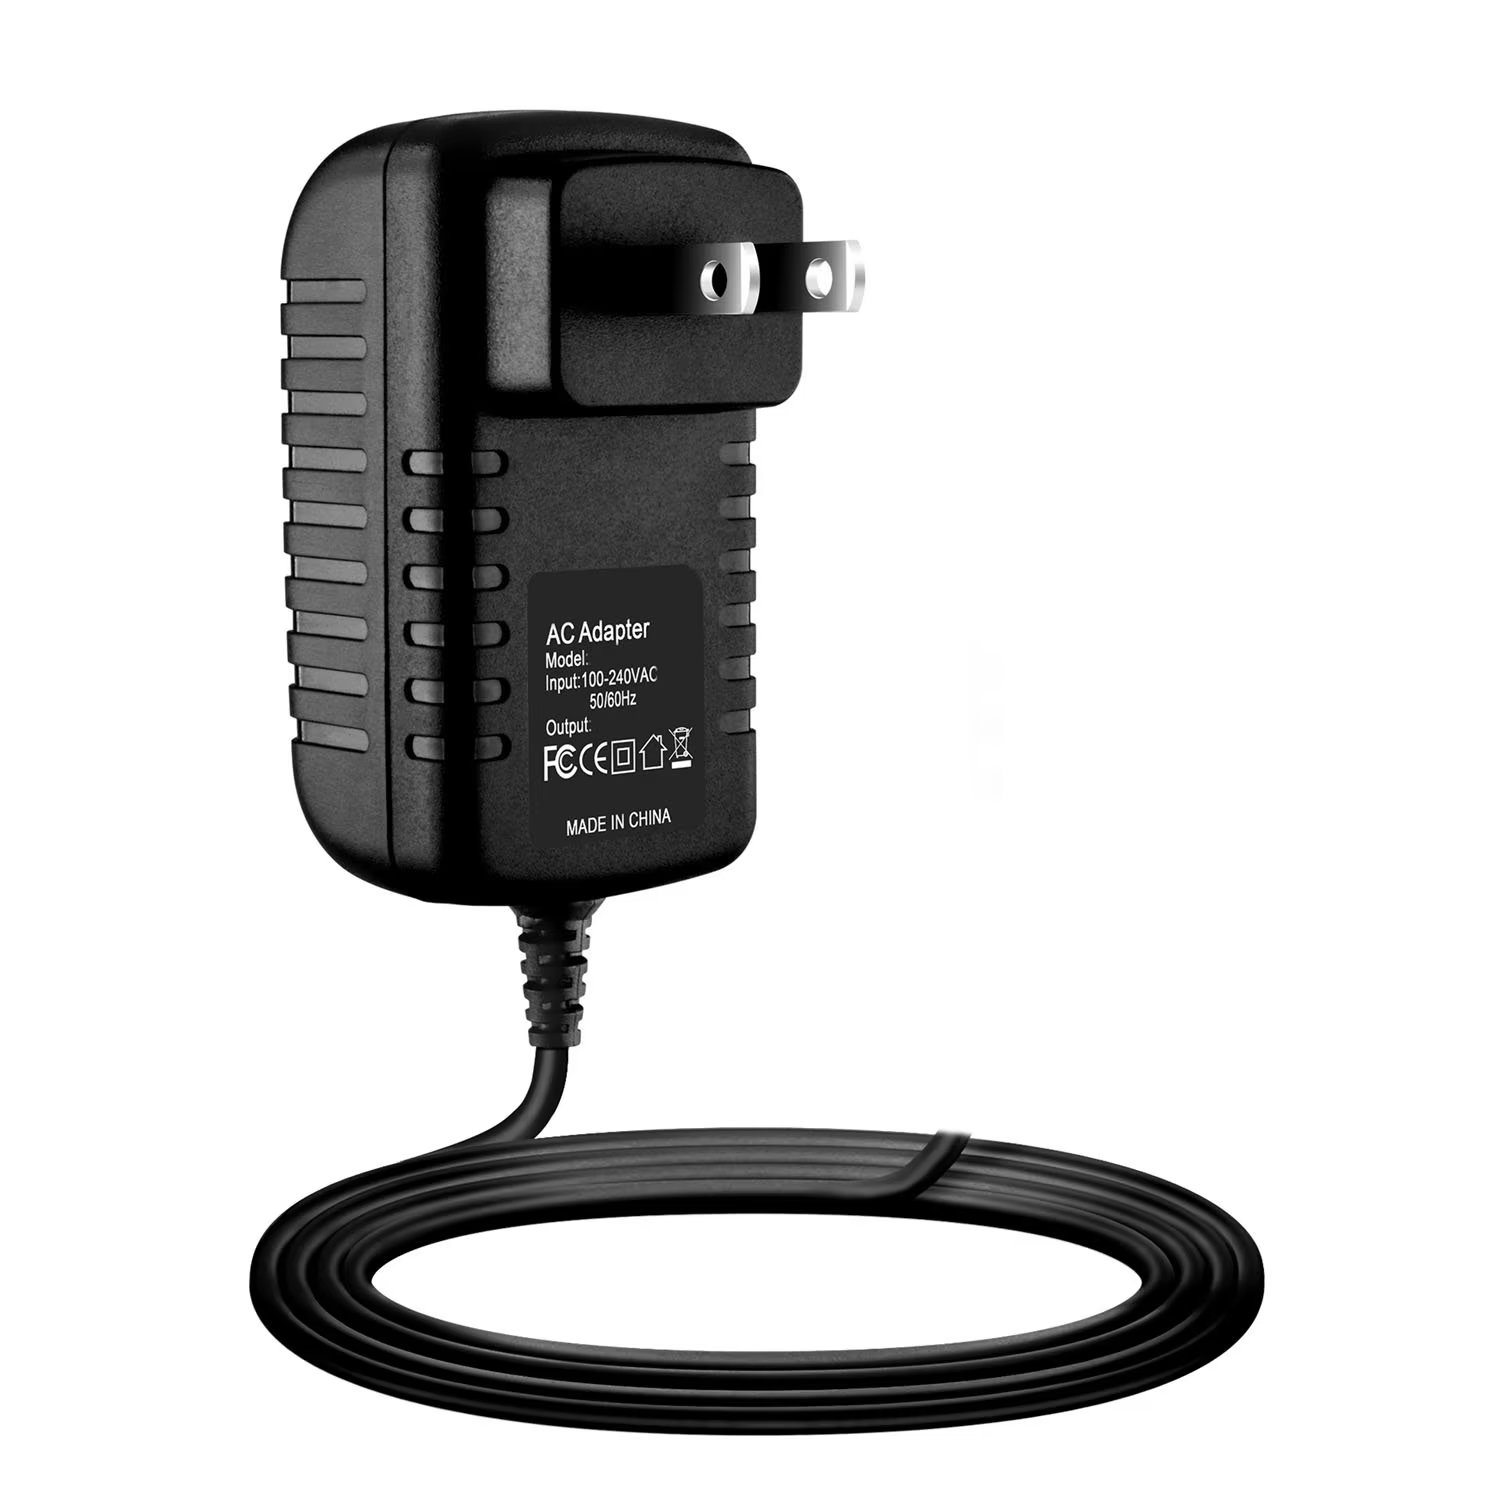 CJP-Geek DC Adapter Charger for AXESS SPBT1031-GY Wireless Hi-Fi Cylinder Loud Speaker - image 1 of 5